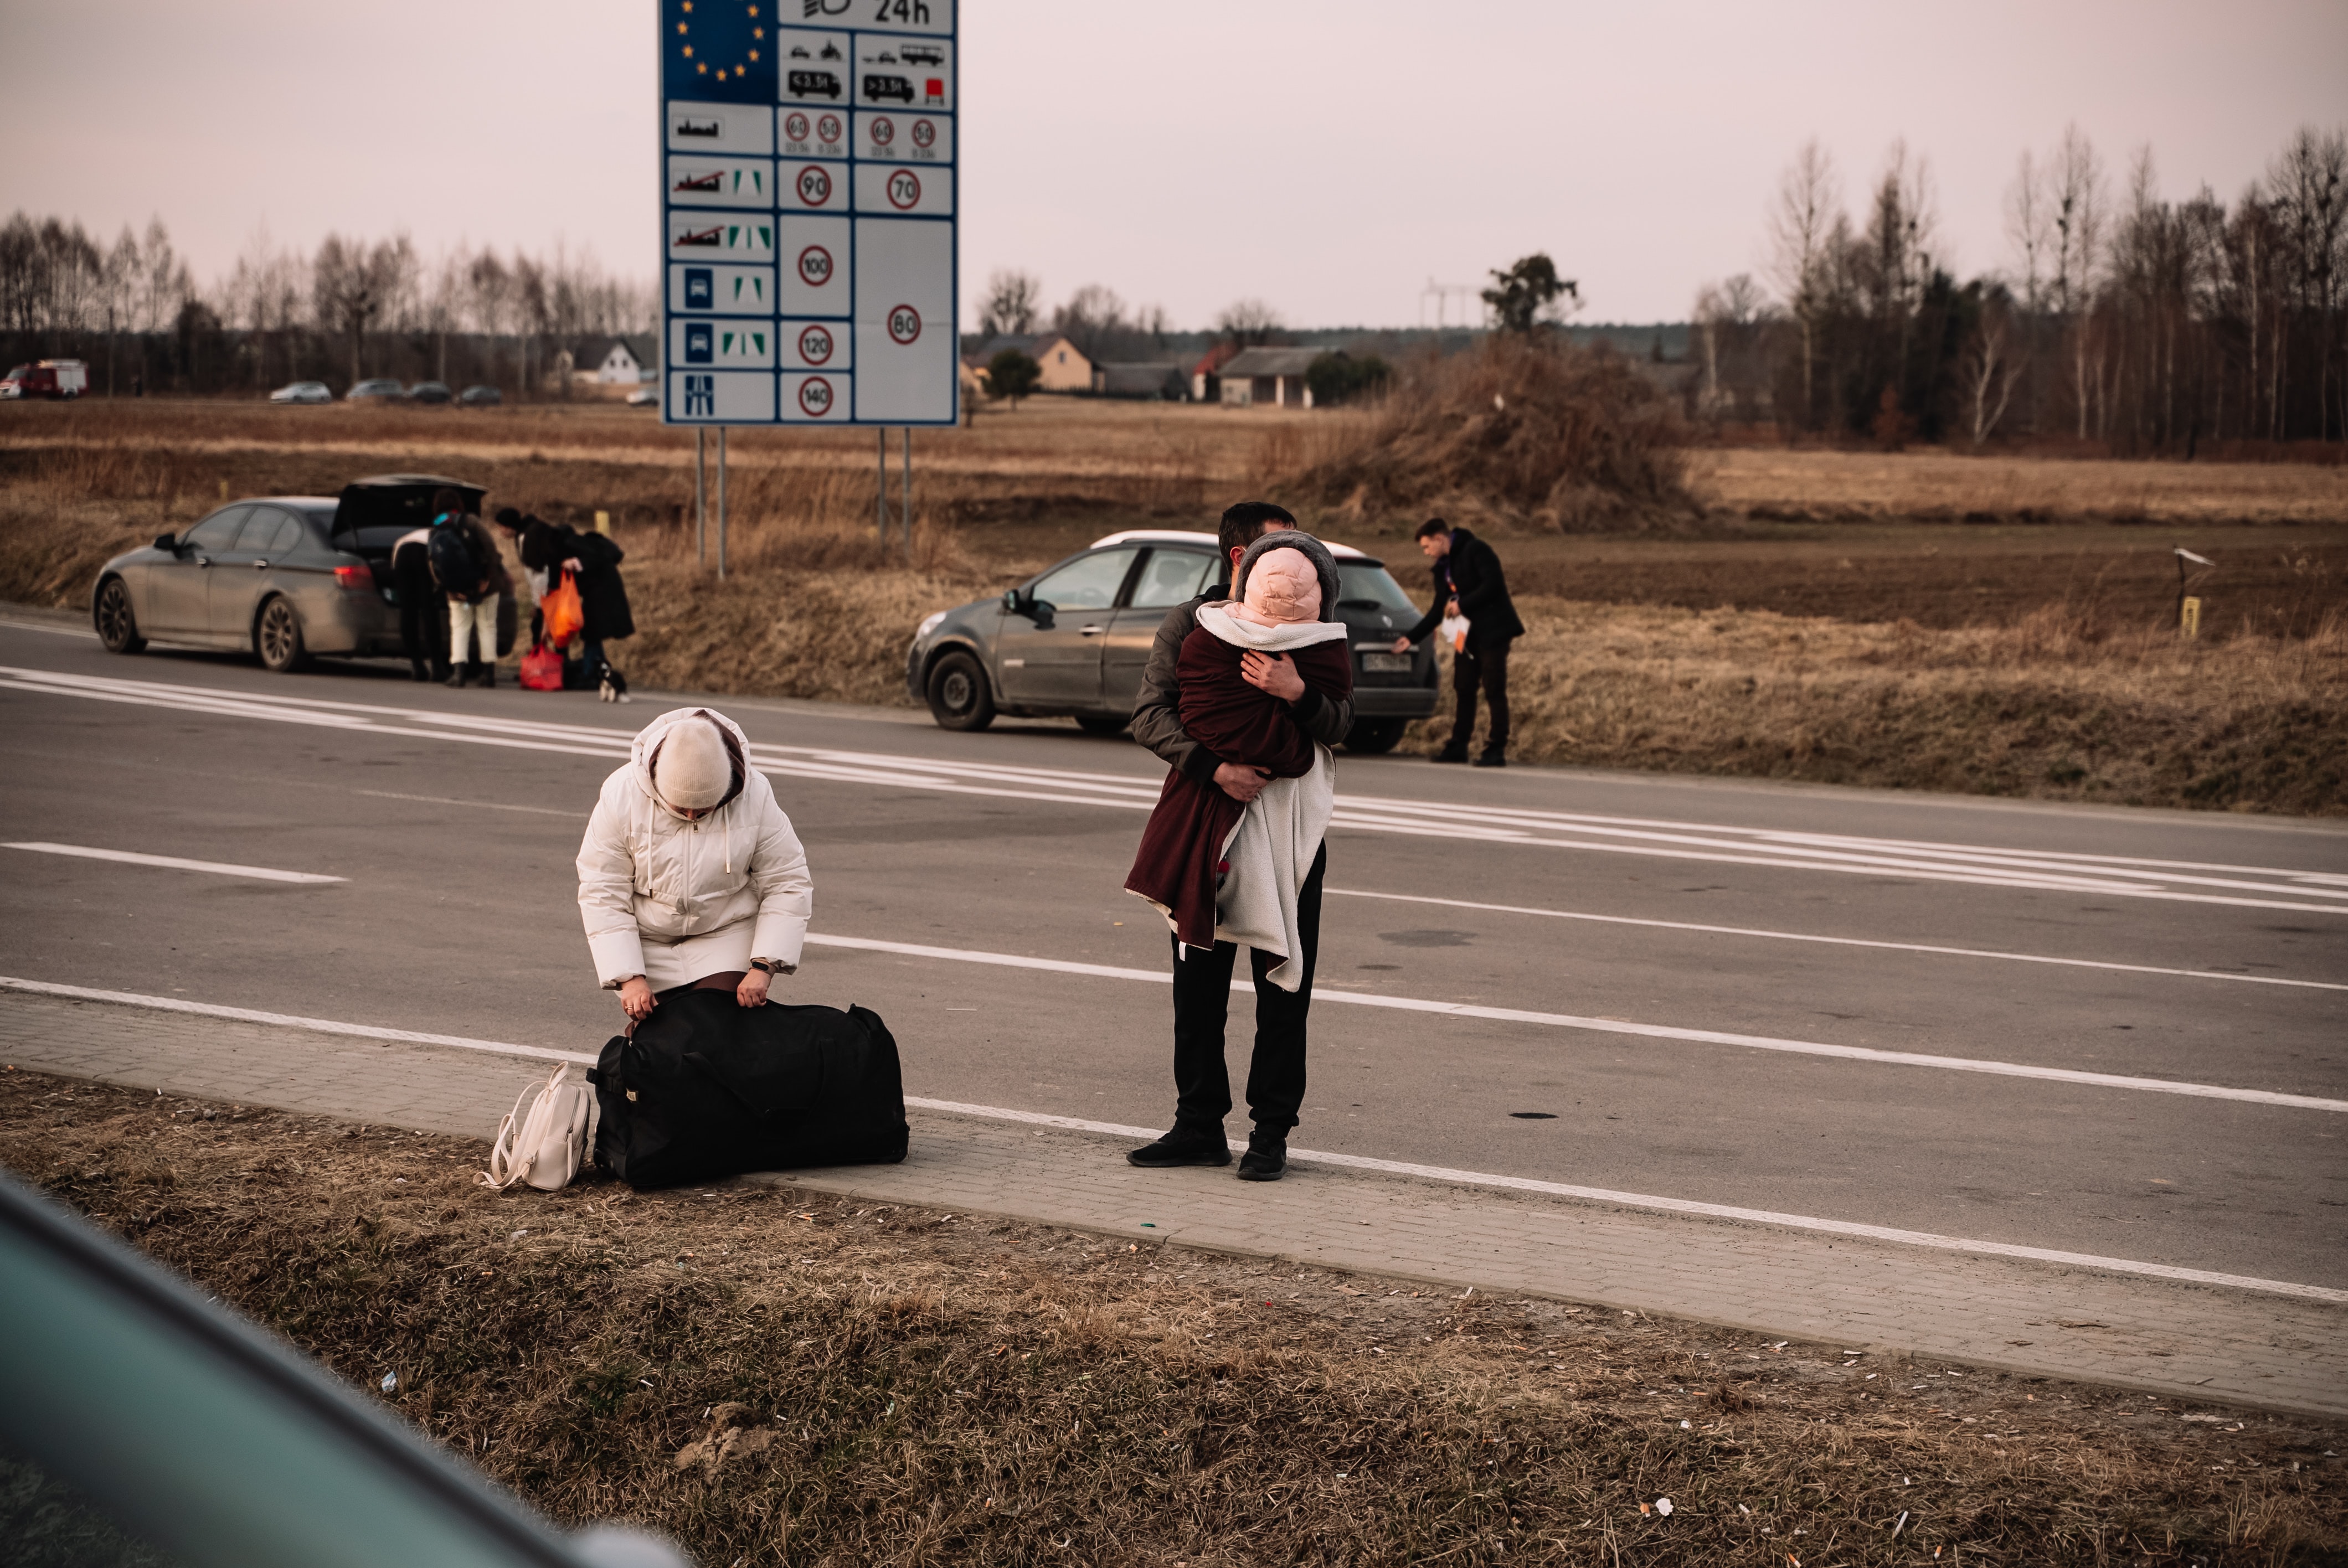 Refugees on the side of the road.